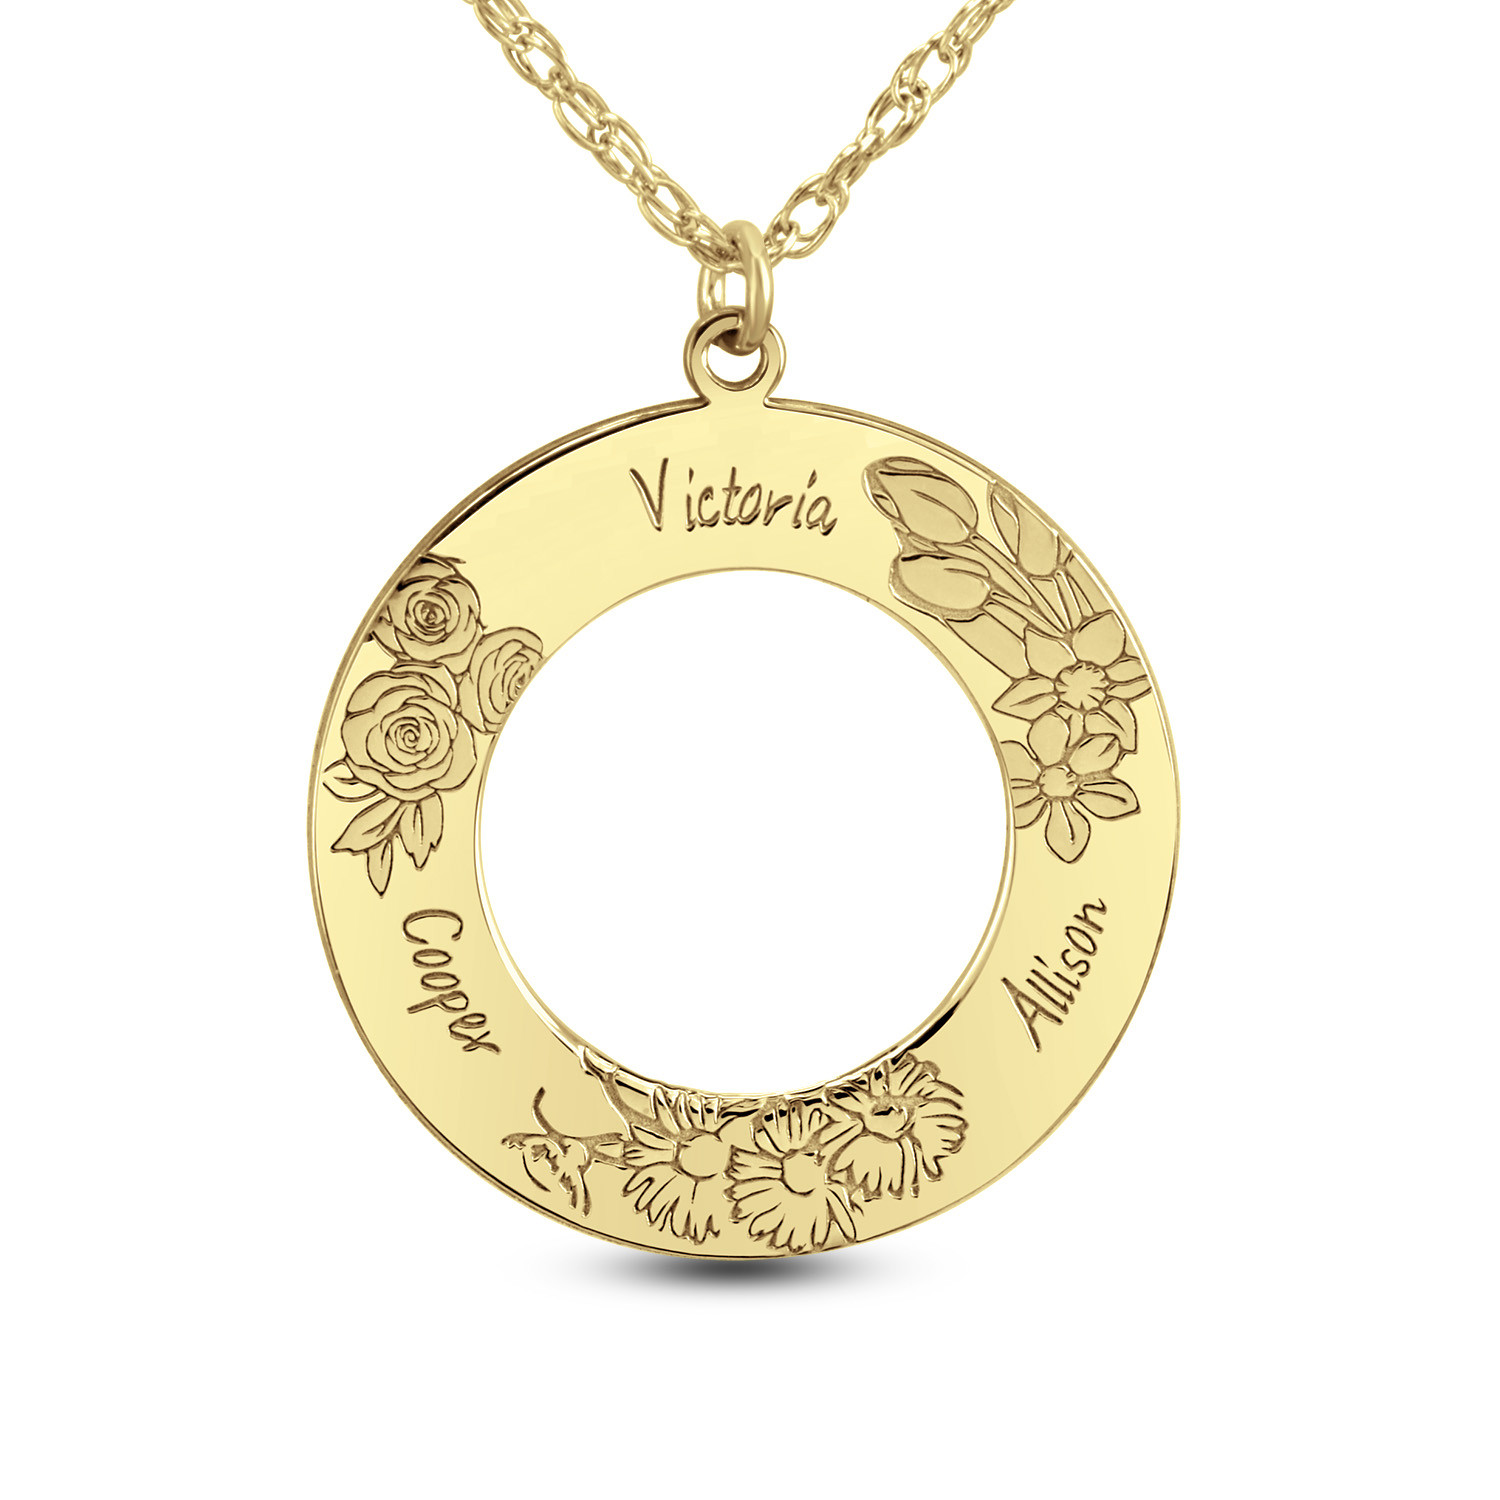 Birth Flower 25.0mm Circle Disc Pendant (1-5 Lines and Flowers)